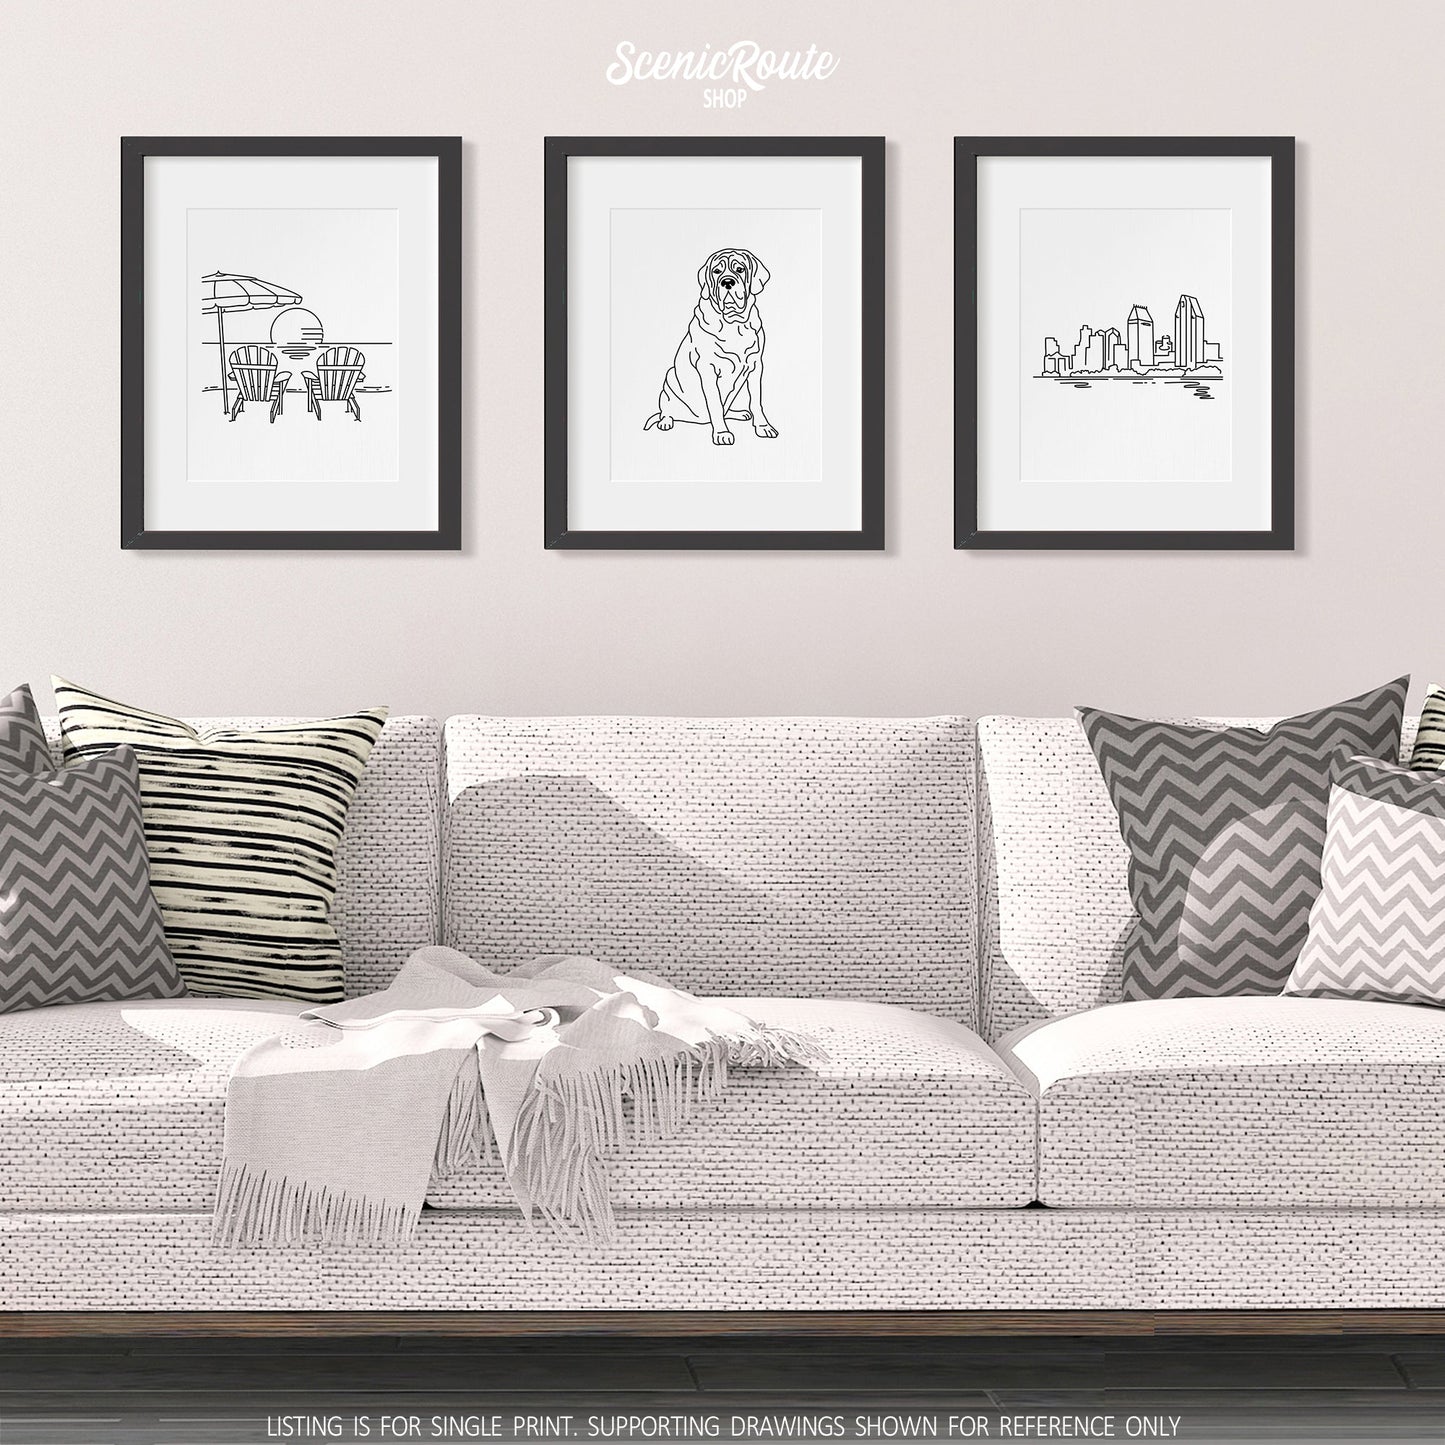 A group of three framed drawings on a white wall hanging above a couch with pillows and a blanket. The line art drawings include Adirondack Beach Chairs, a Mastiff dog, and the San Diego Skyline